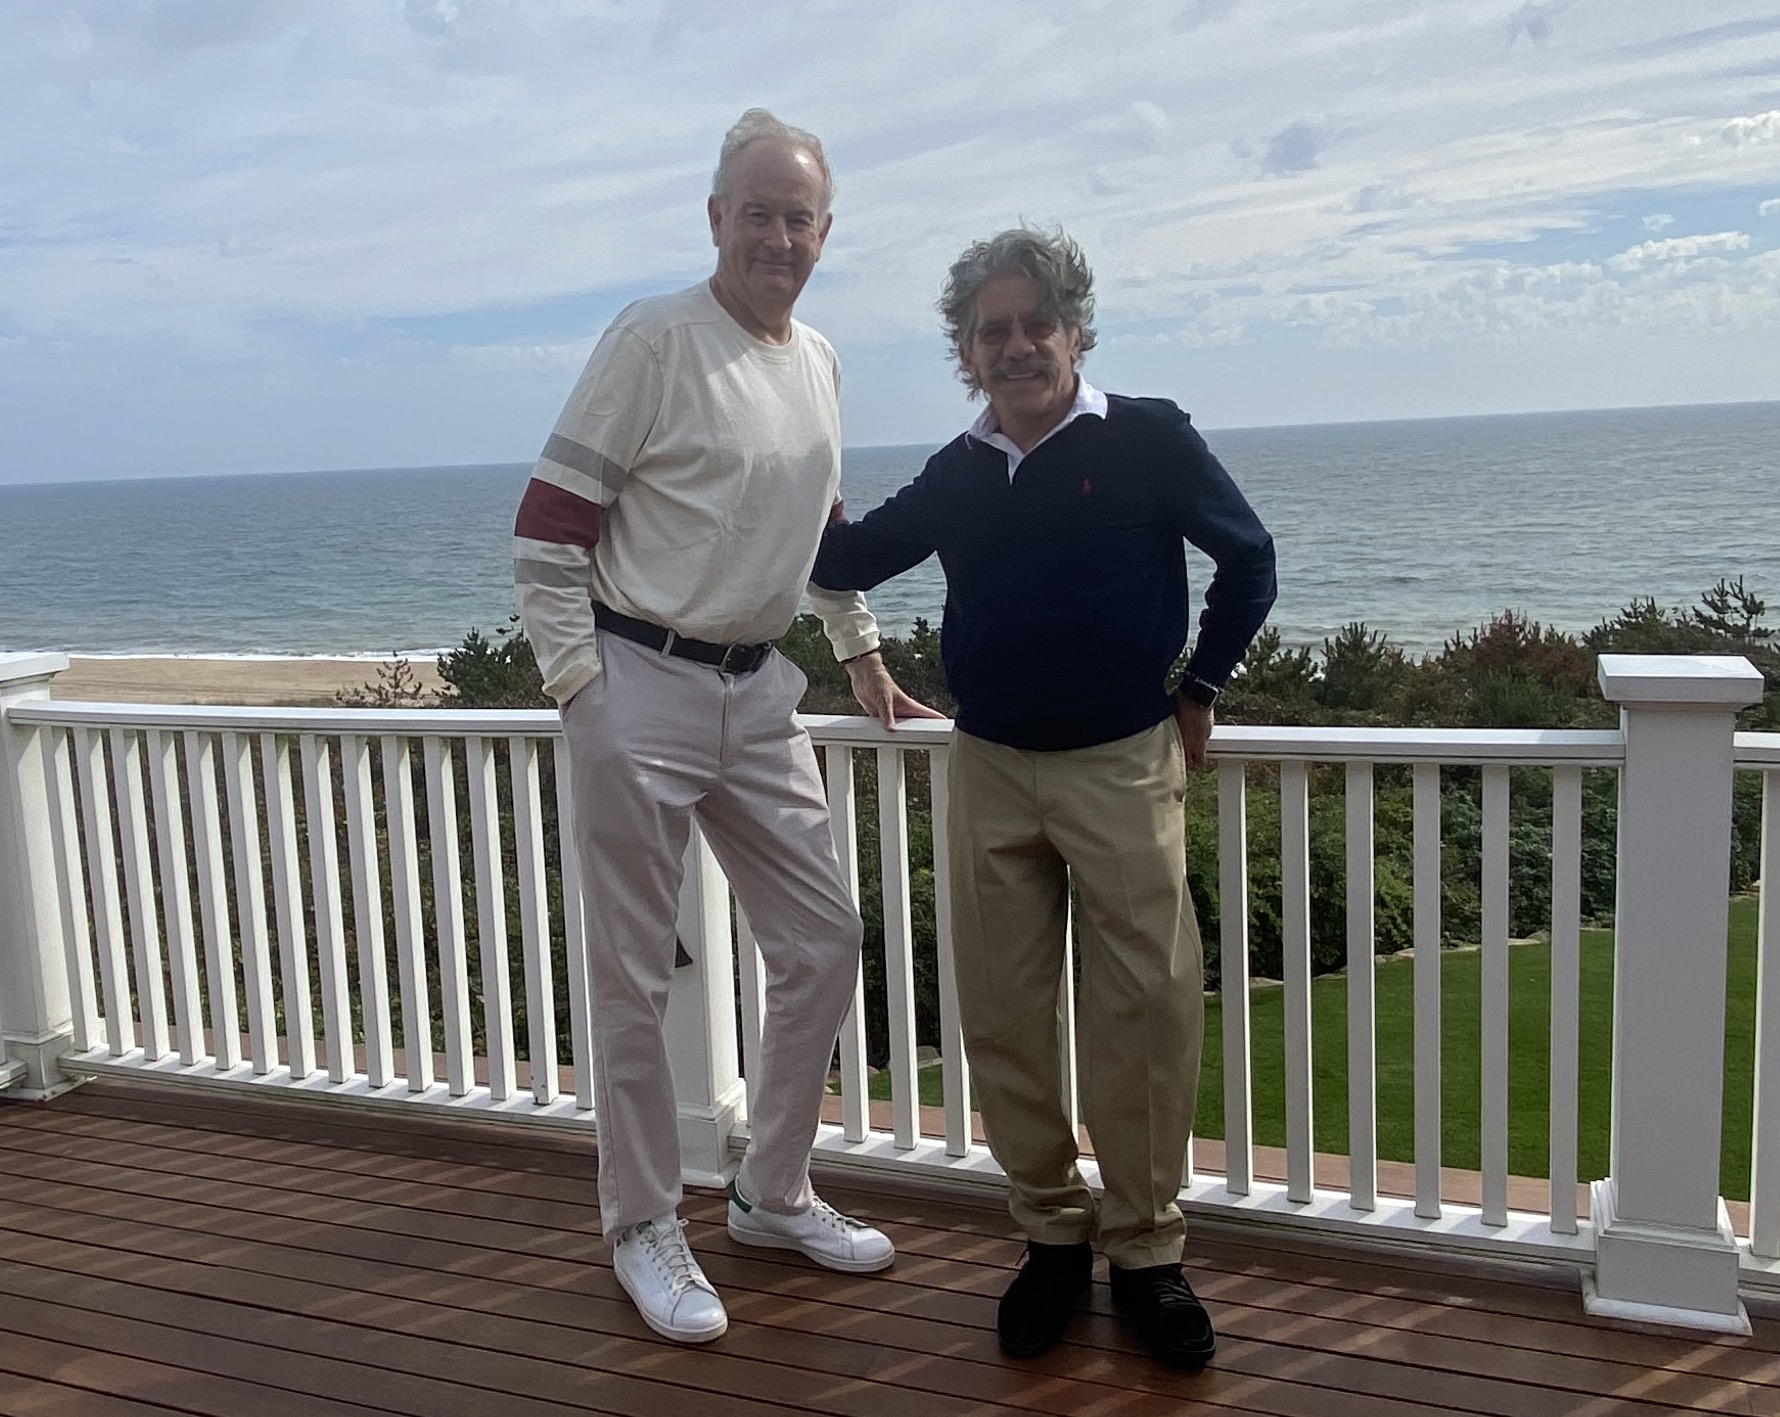 Bill O'Reilly and Geraldo Rivera out on O'Reilly's Montauk deck overlooking the ocean.